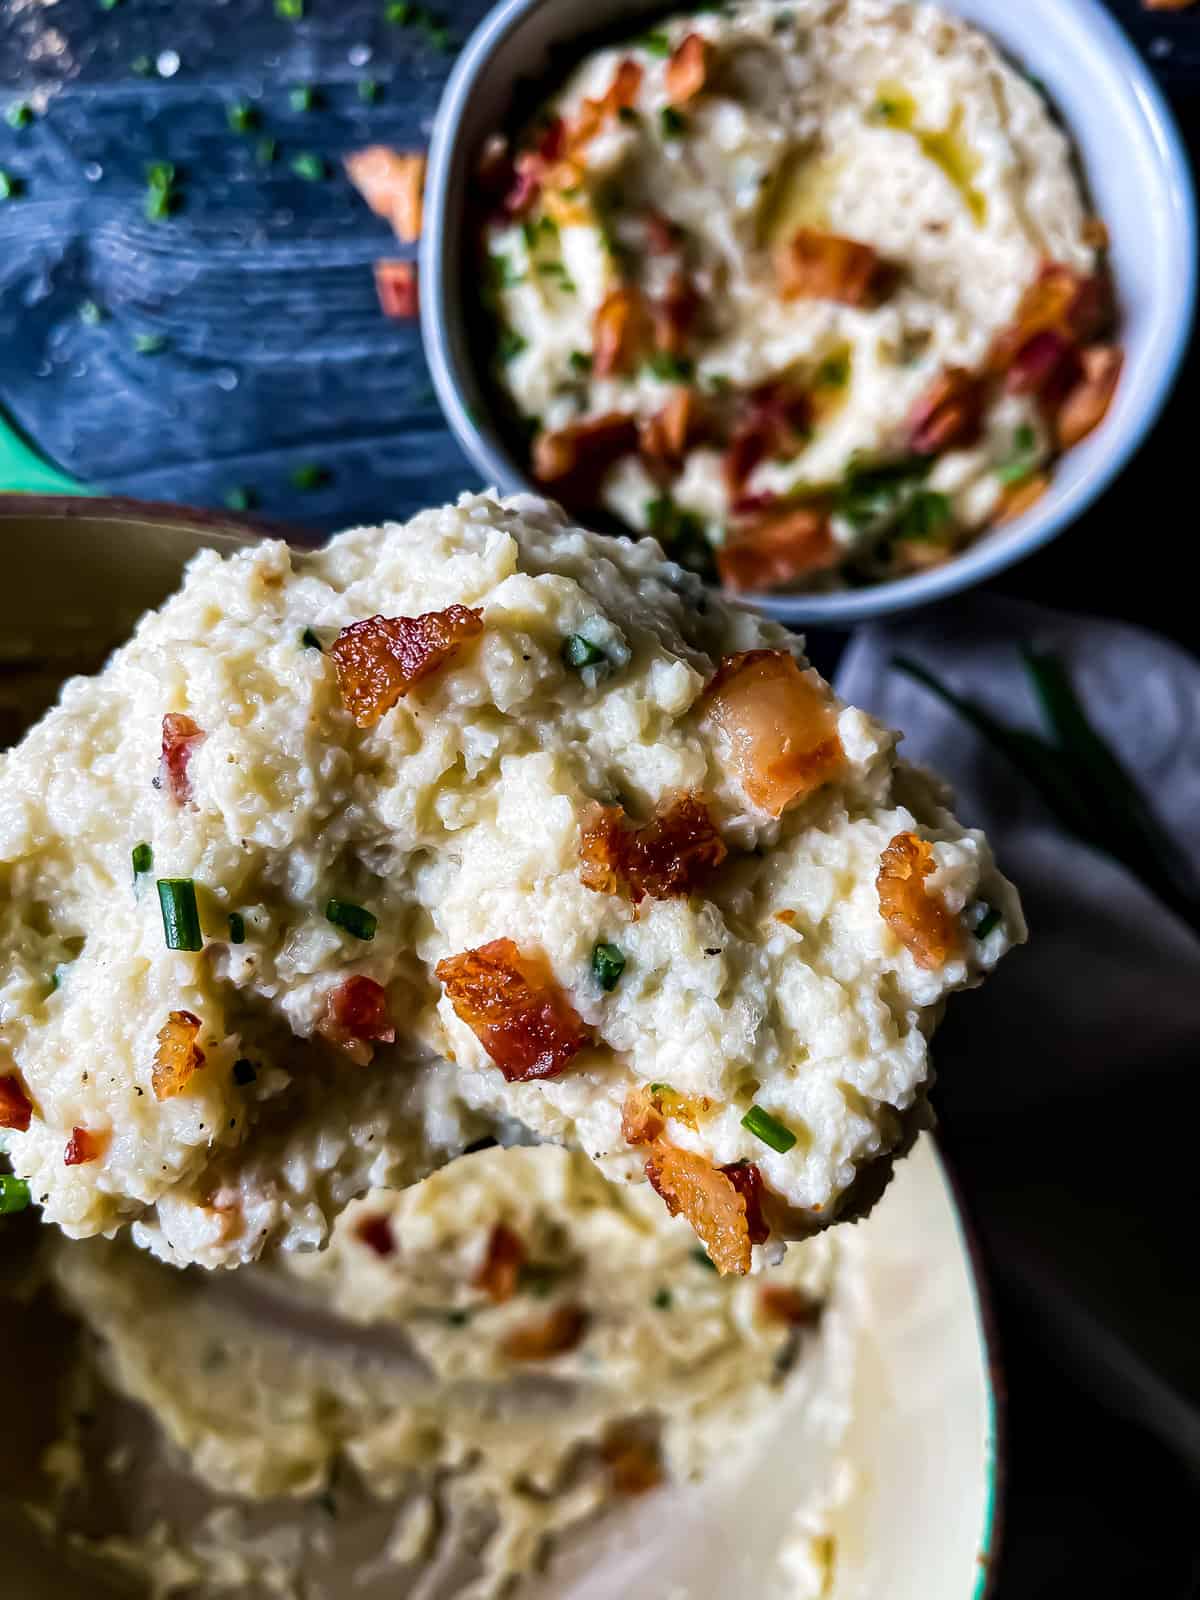 mashed cauliflower garnished with chives, bacon